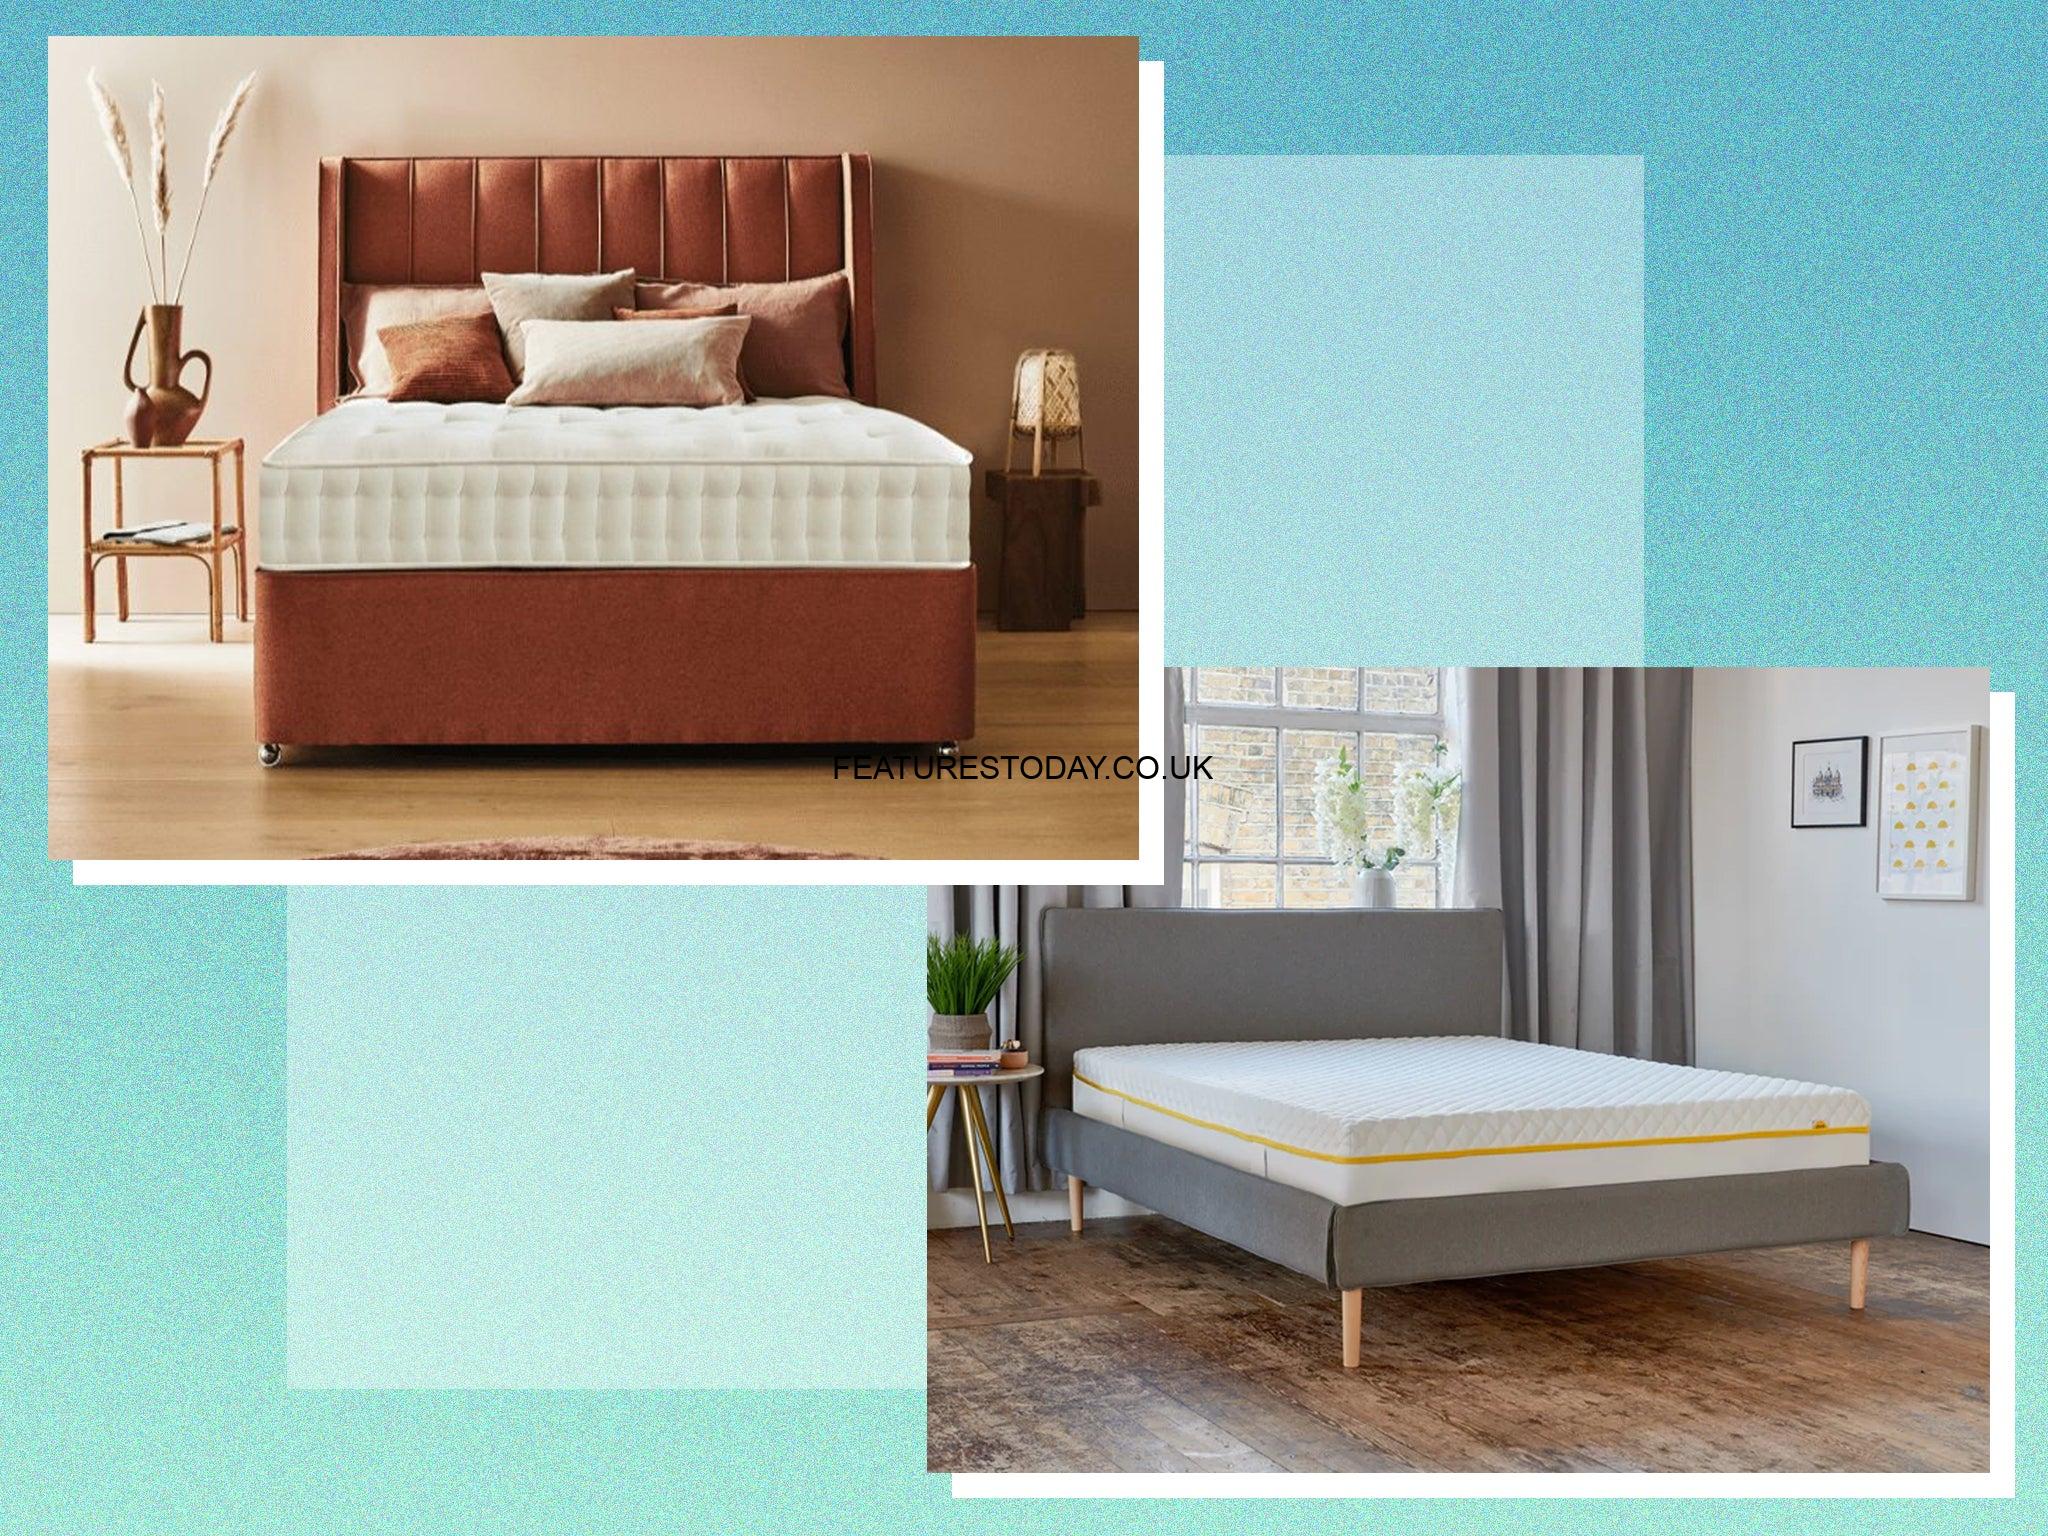 Recommended Mattresses